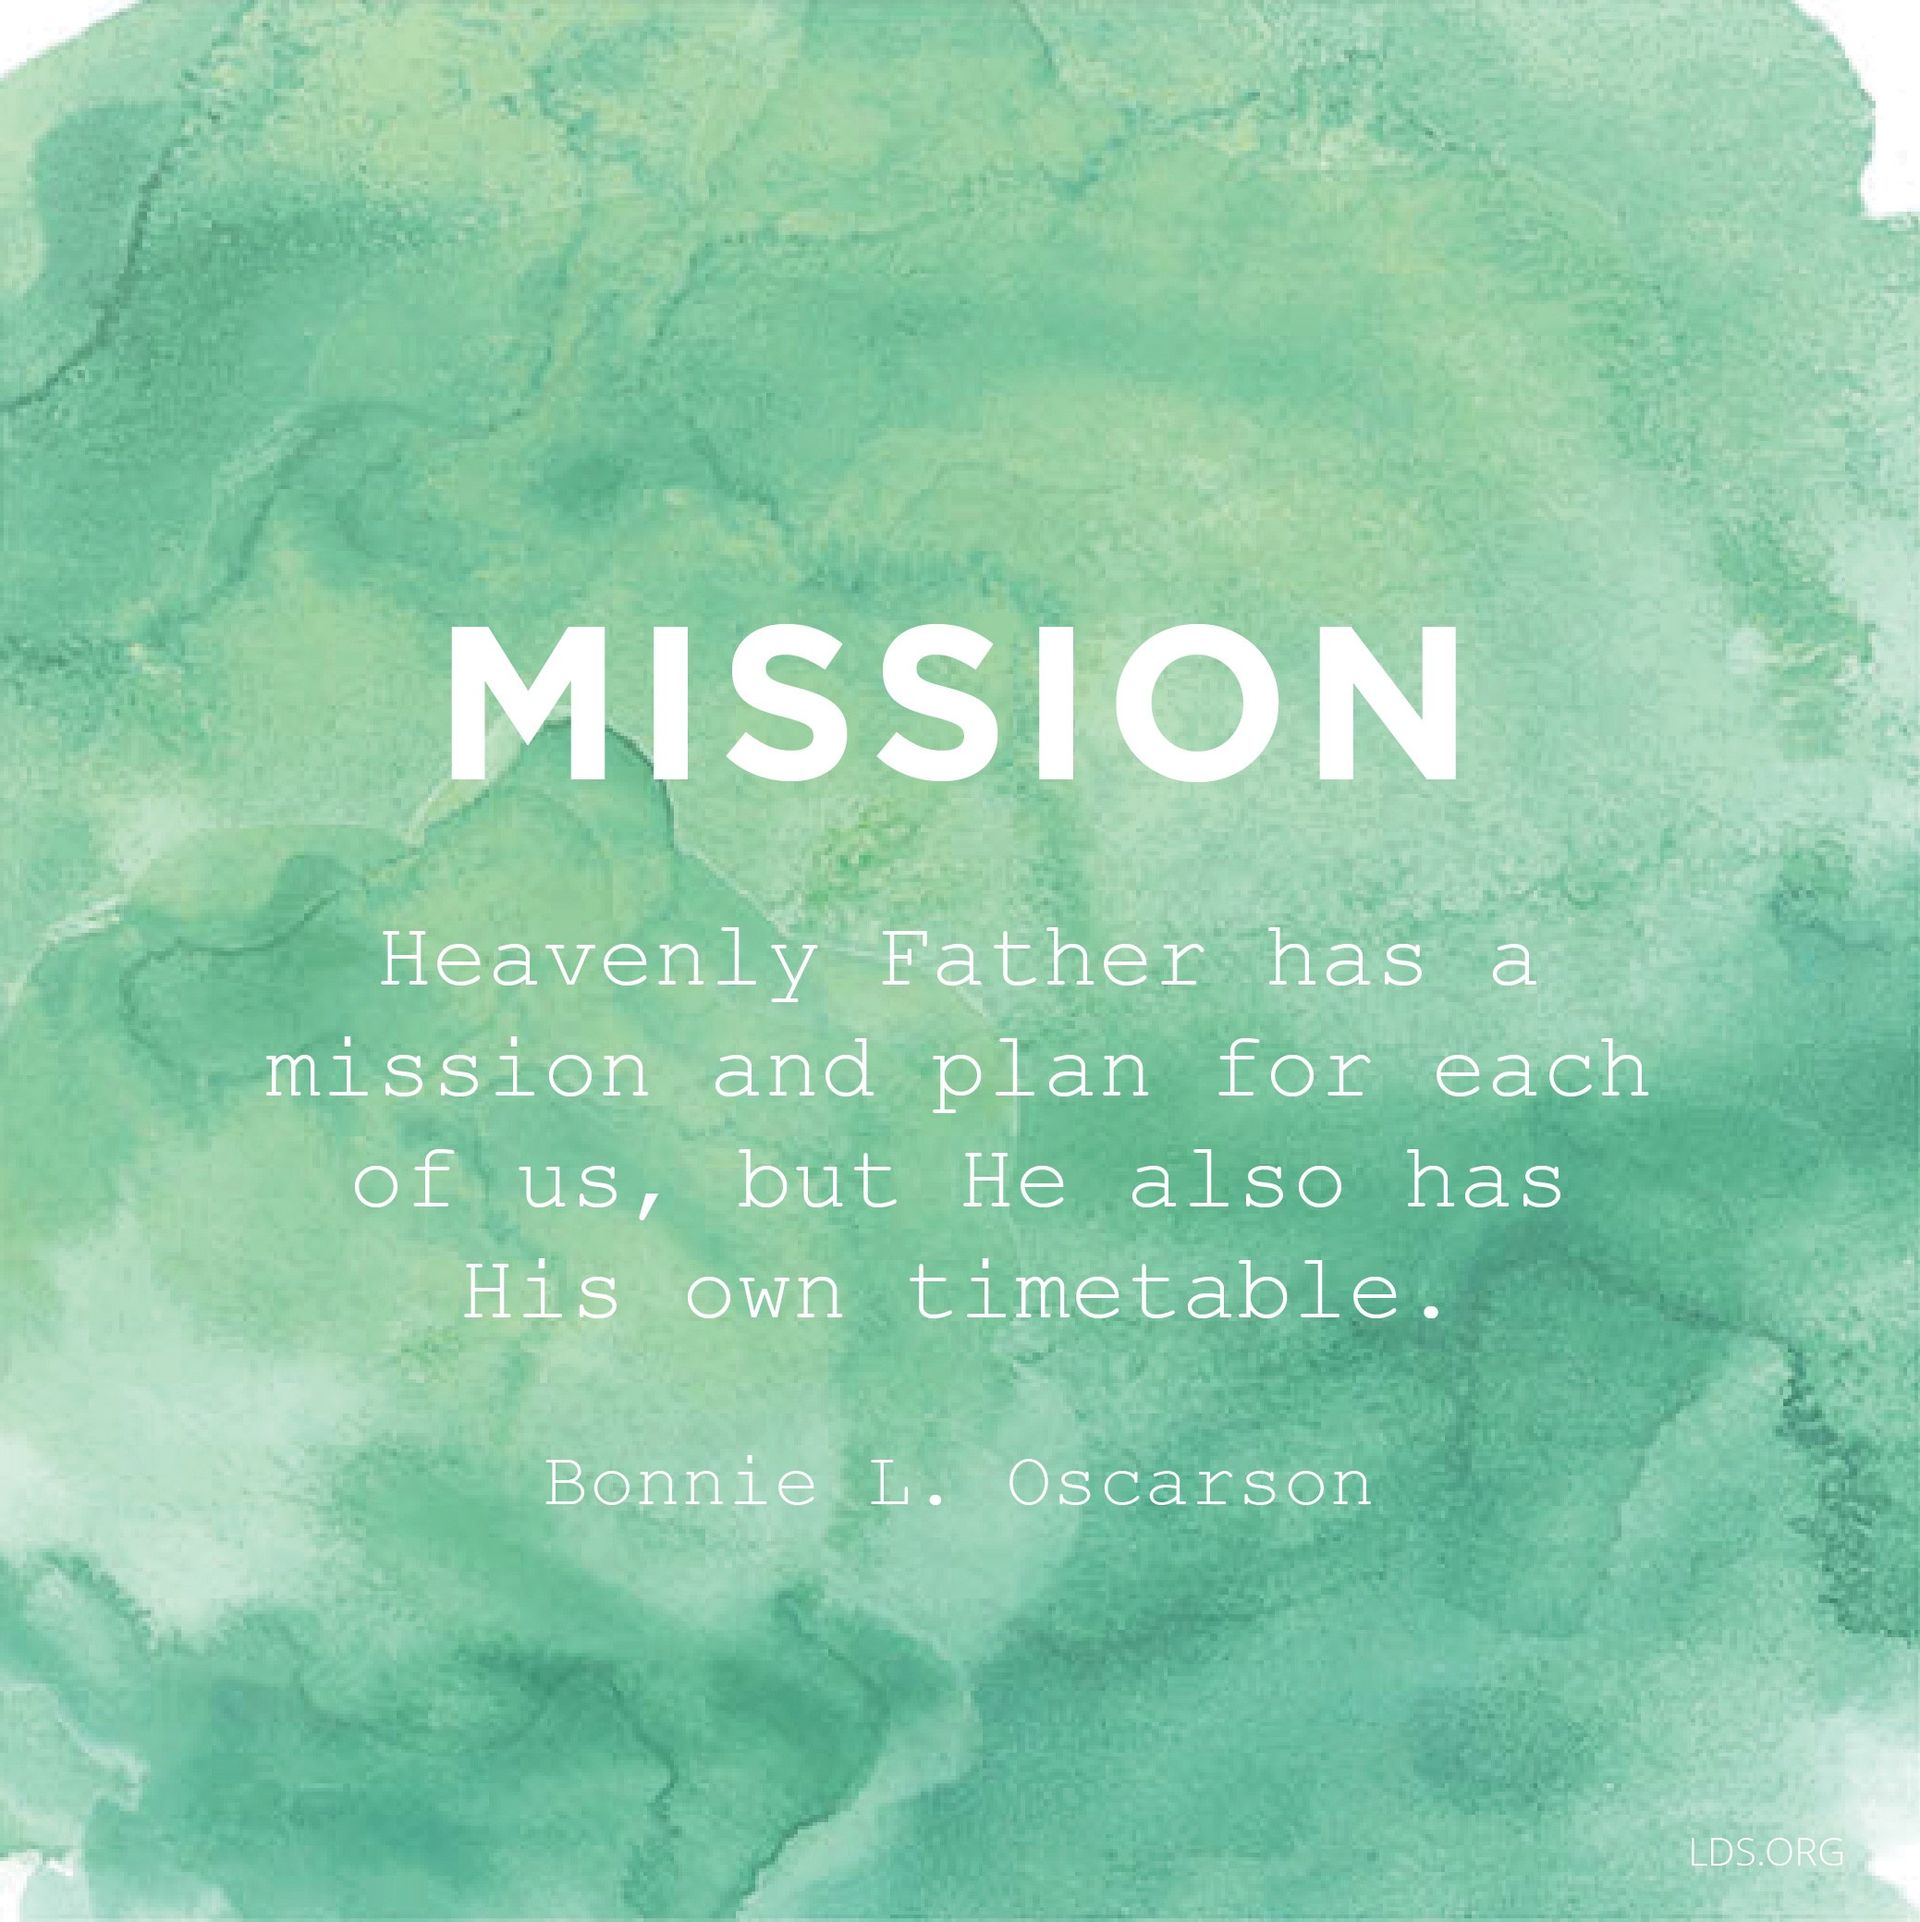 “Heavenly Father has a mission and plan for each of us, but He also has His own timetable.”—Sister Bonnie L. Oscarson, “Defenders of the Family Proclamation”